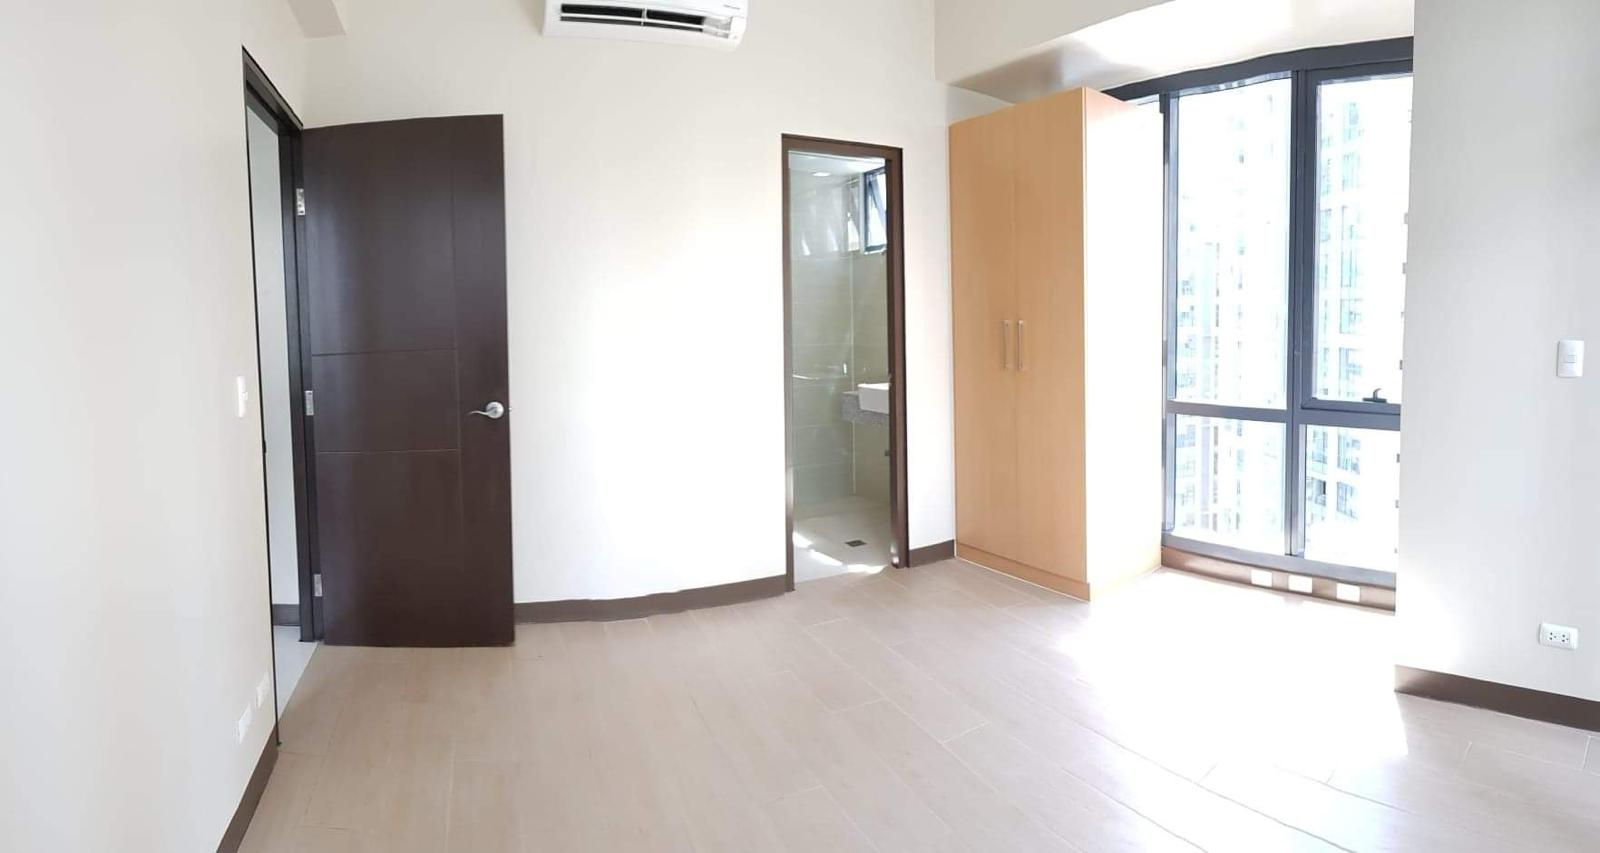 2BR Condo unit for Sale in The Florence Mckinley